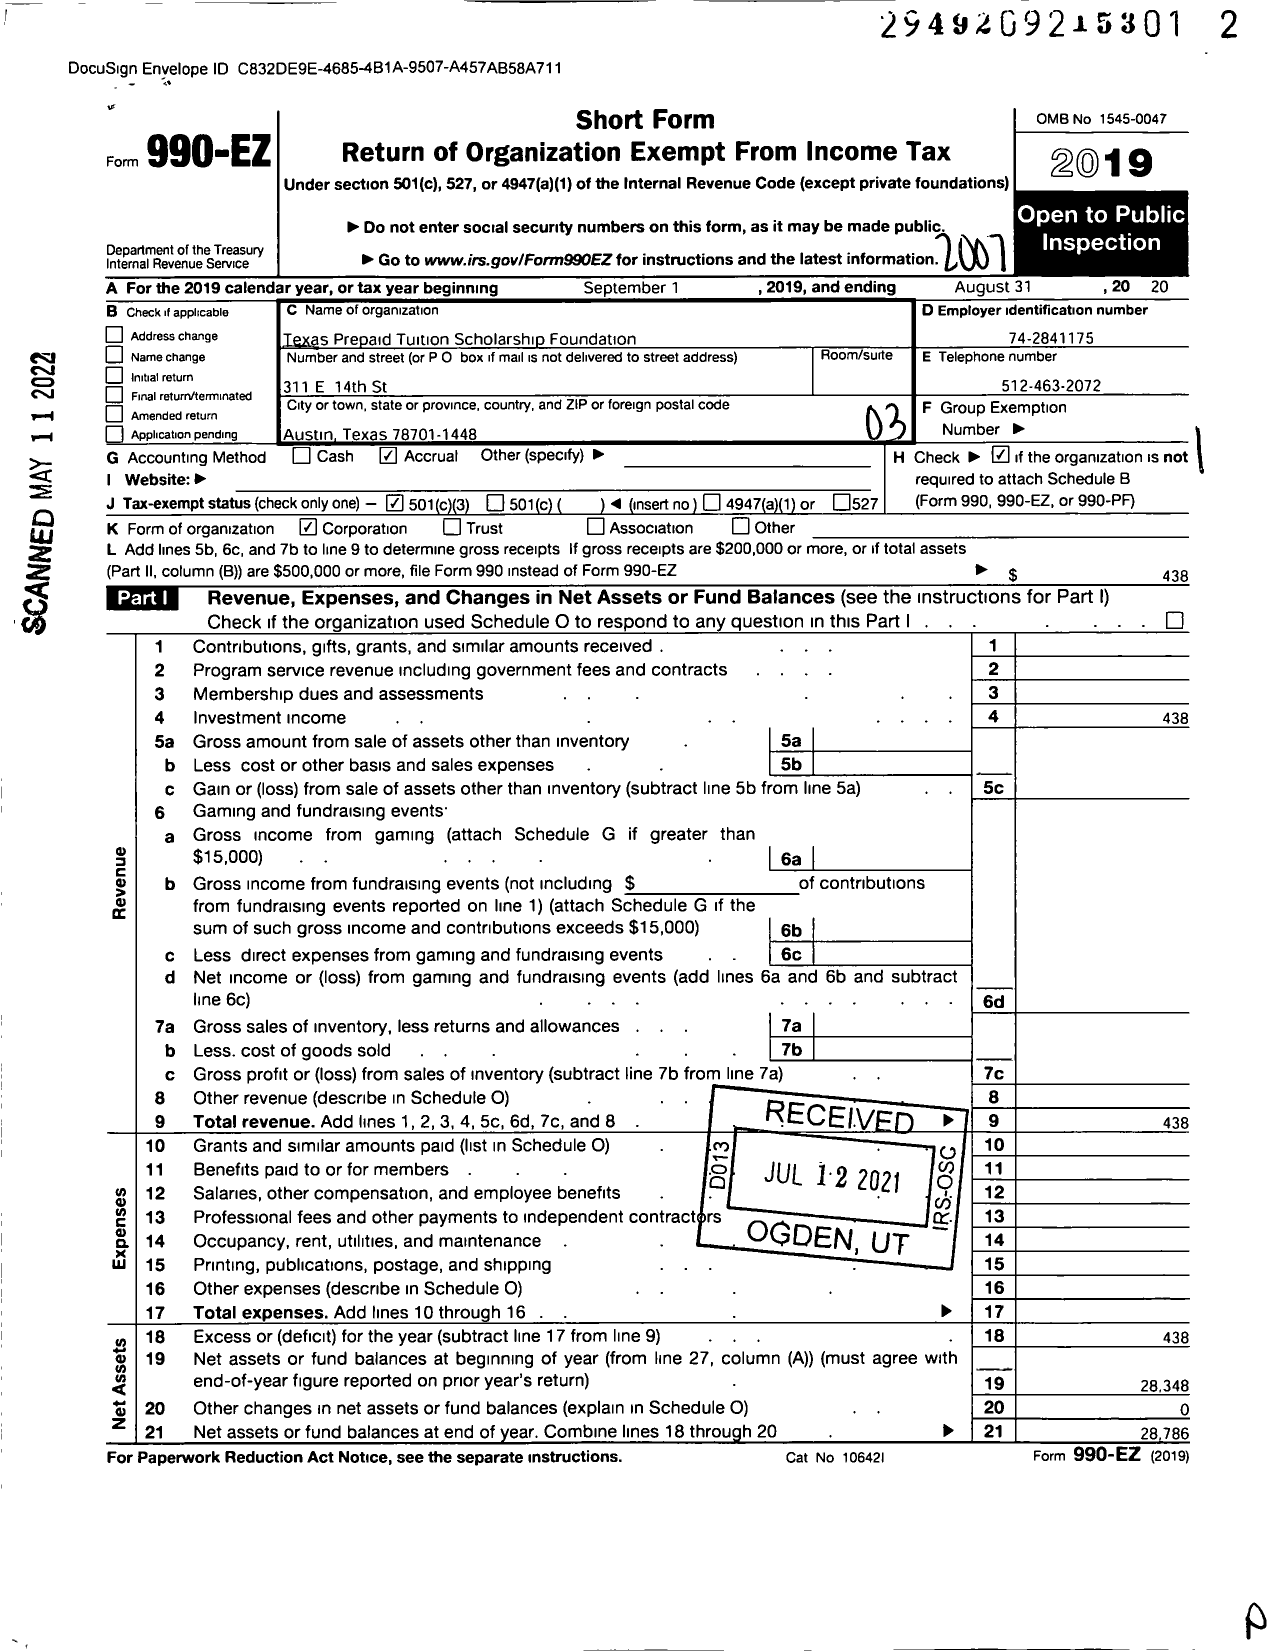 Image of first page of 2019 Form 990EZ for Texas Prepaid Tuition Scholarship Foundation